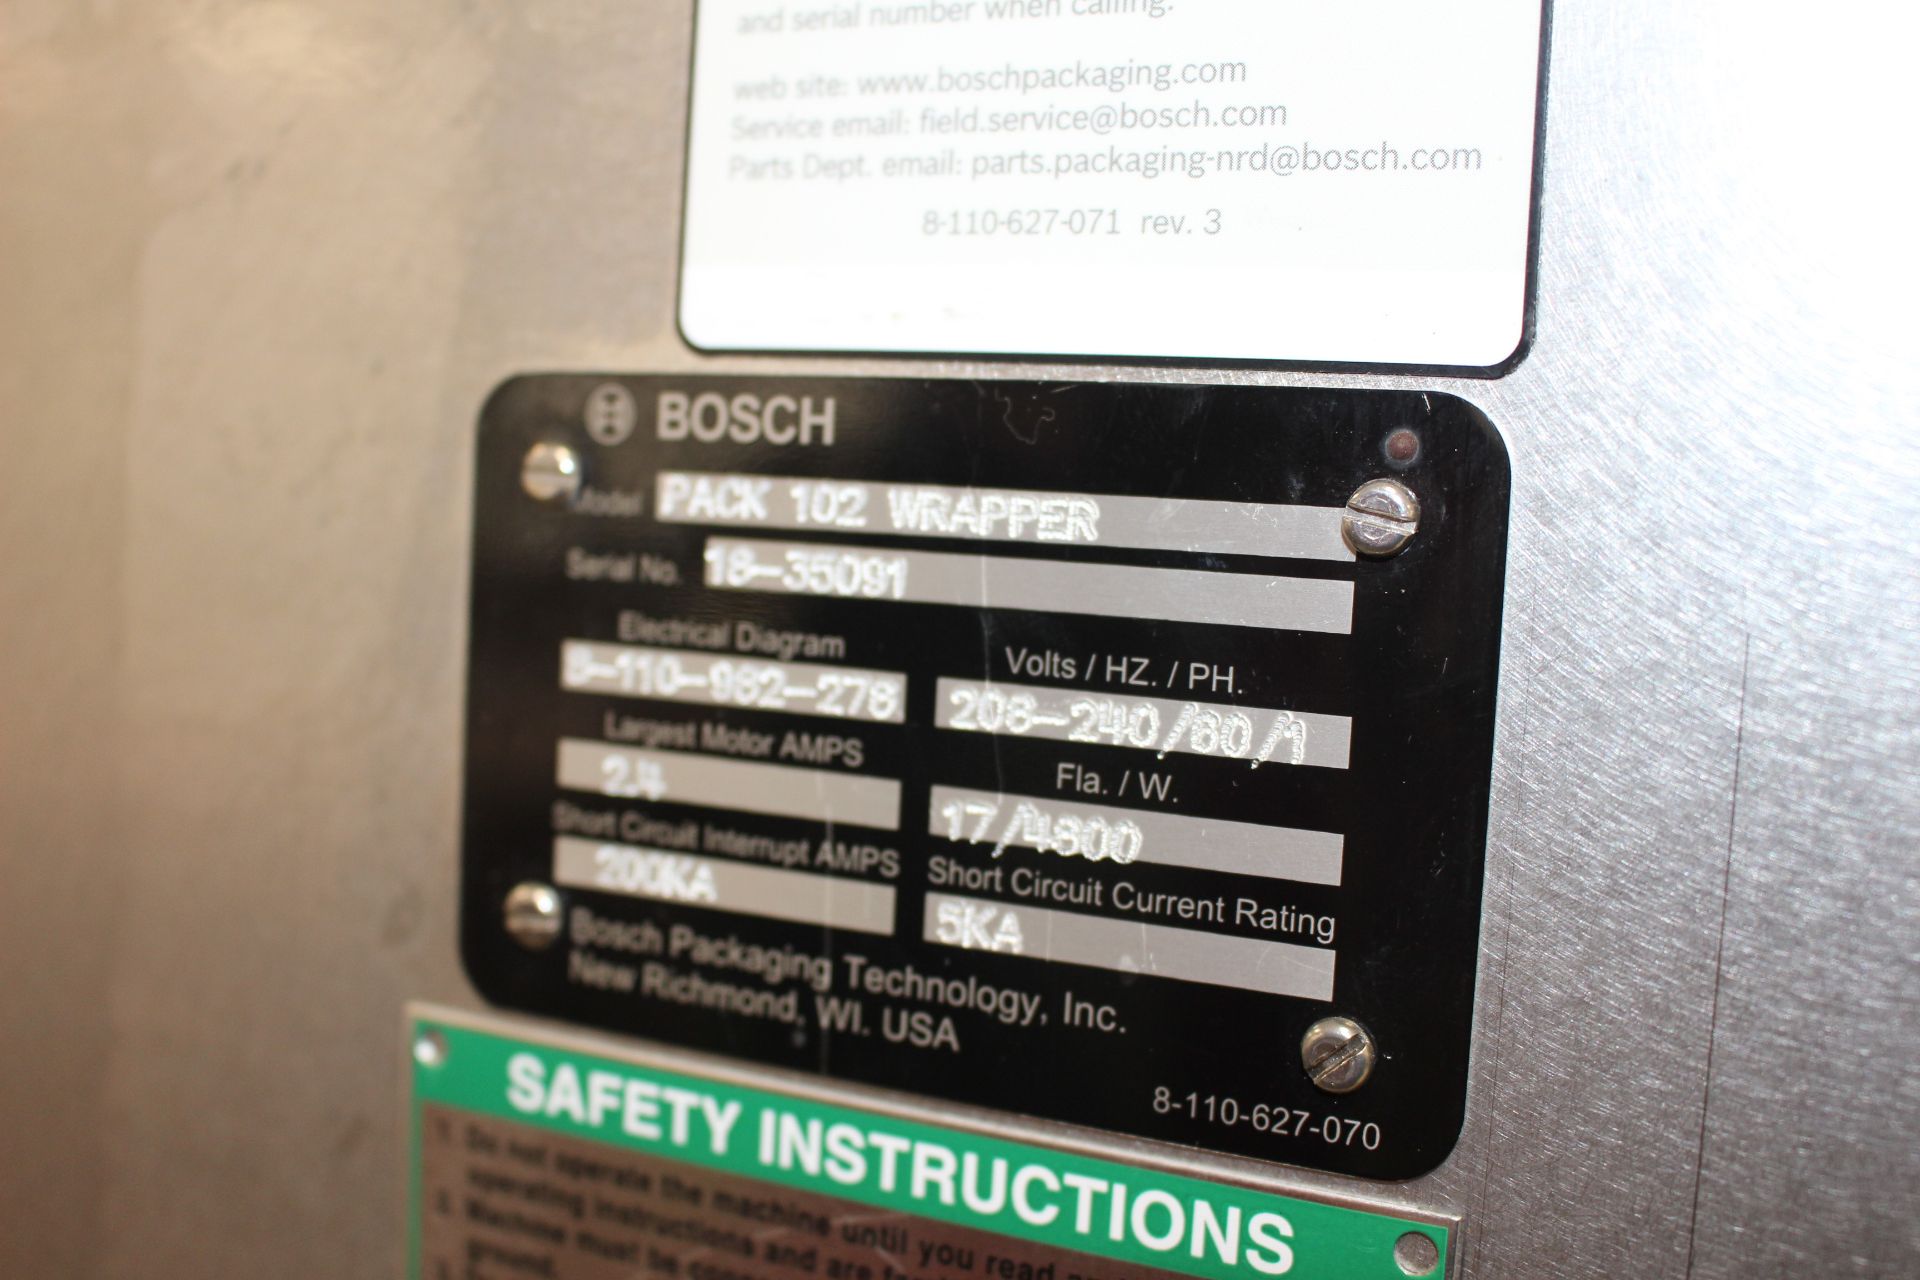 Bosch Pack 102 Horizontal Flow Wrapper serial#18-35091 built new 2018. Single phase, 208-240 - Image 7 of 7